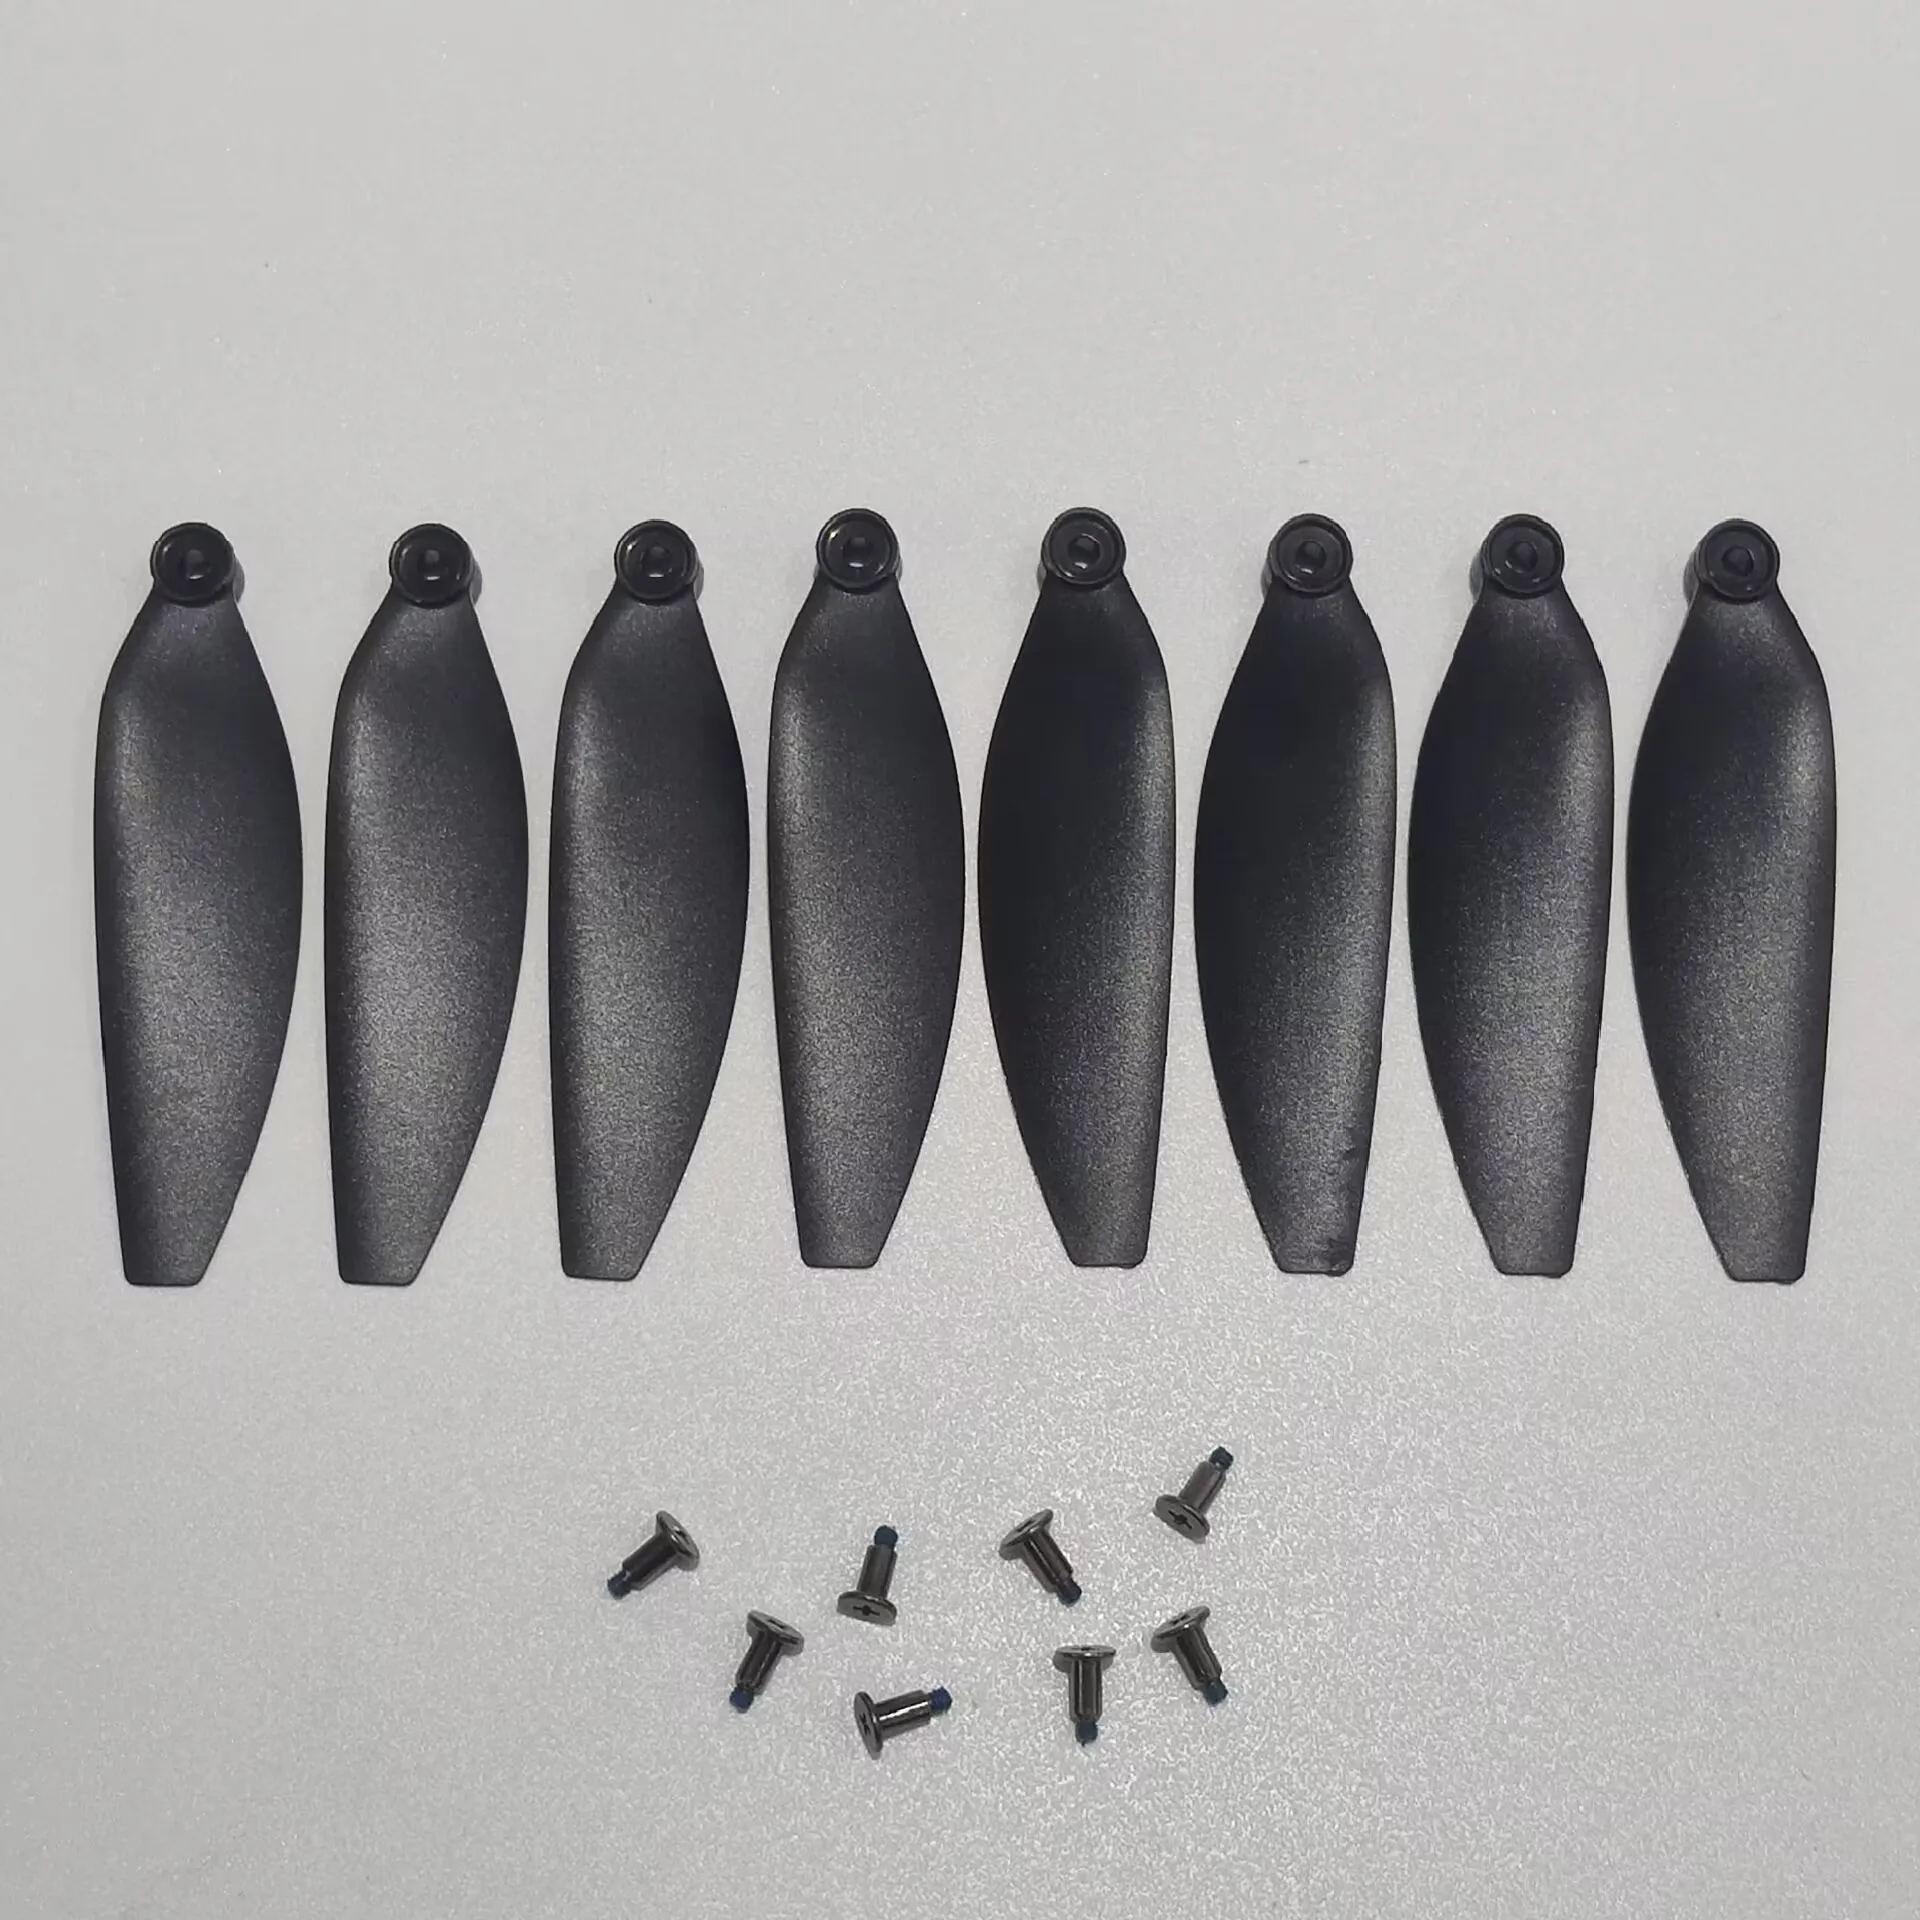 

8PCS K102 MAX Drone Brushless Foldable RC Quadcopter CW CCW Propellers Blade Wings Maple Leaf Blades Propeller Accessories